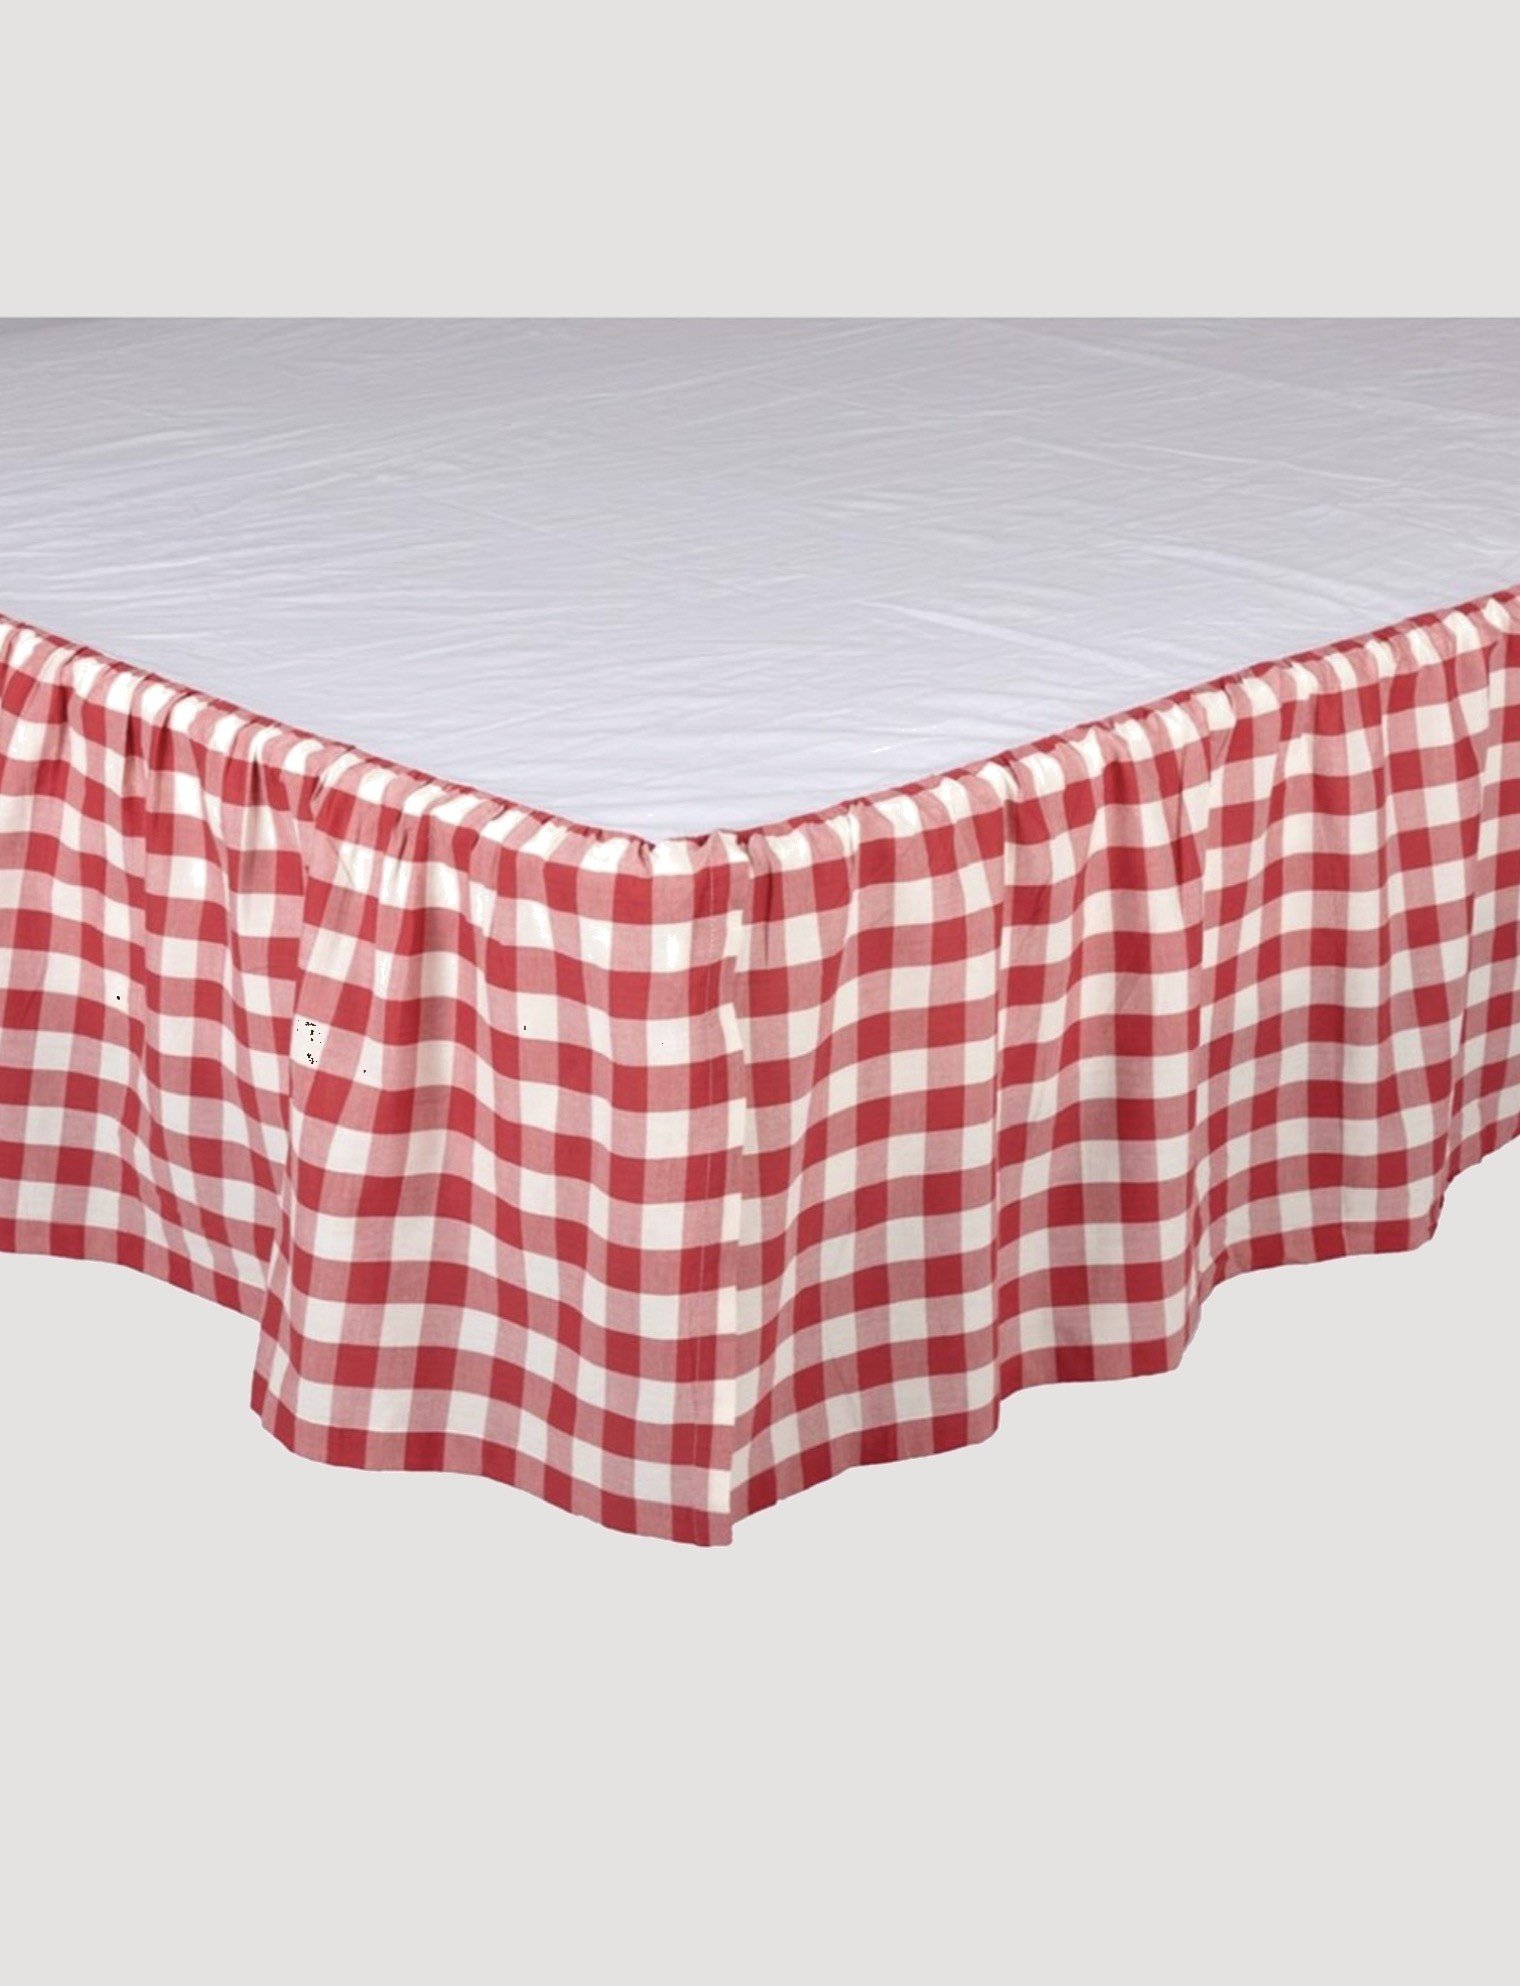 VHC Brands Annie Buffalo Check Red Bed Skirt Brand: VHC Brands